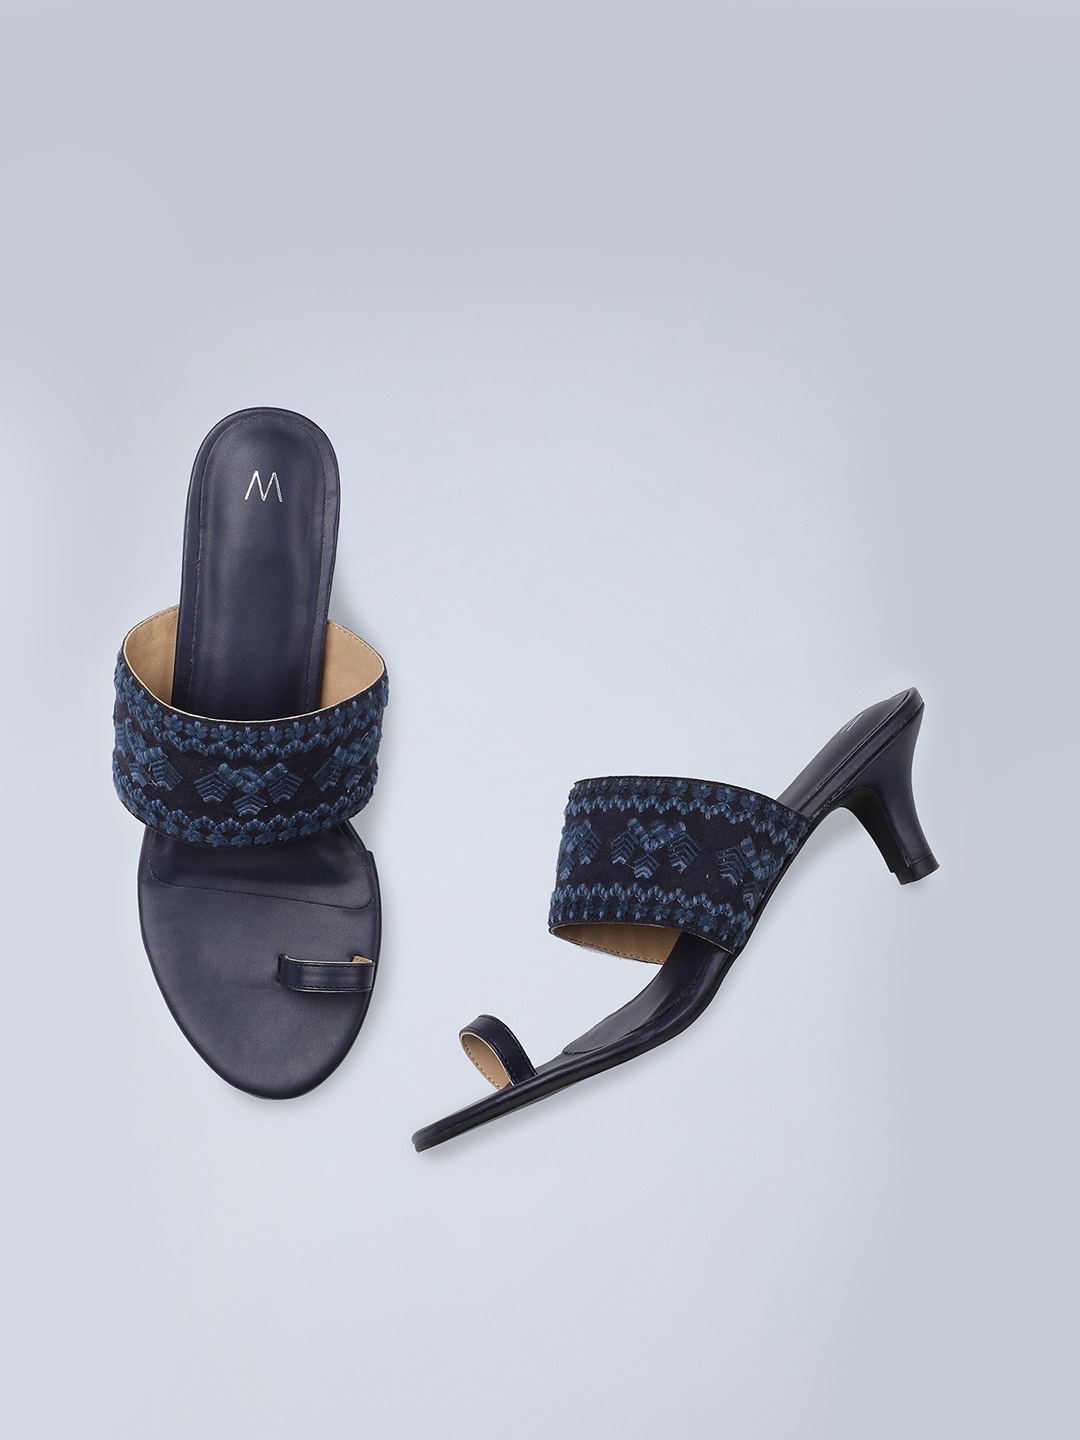 W Navy Blue Embellished Ethnic Kitten Sandals Price in India